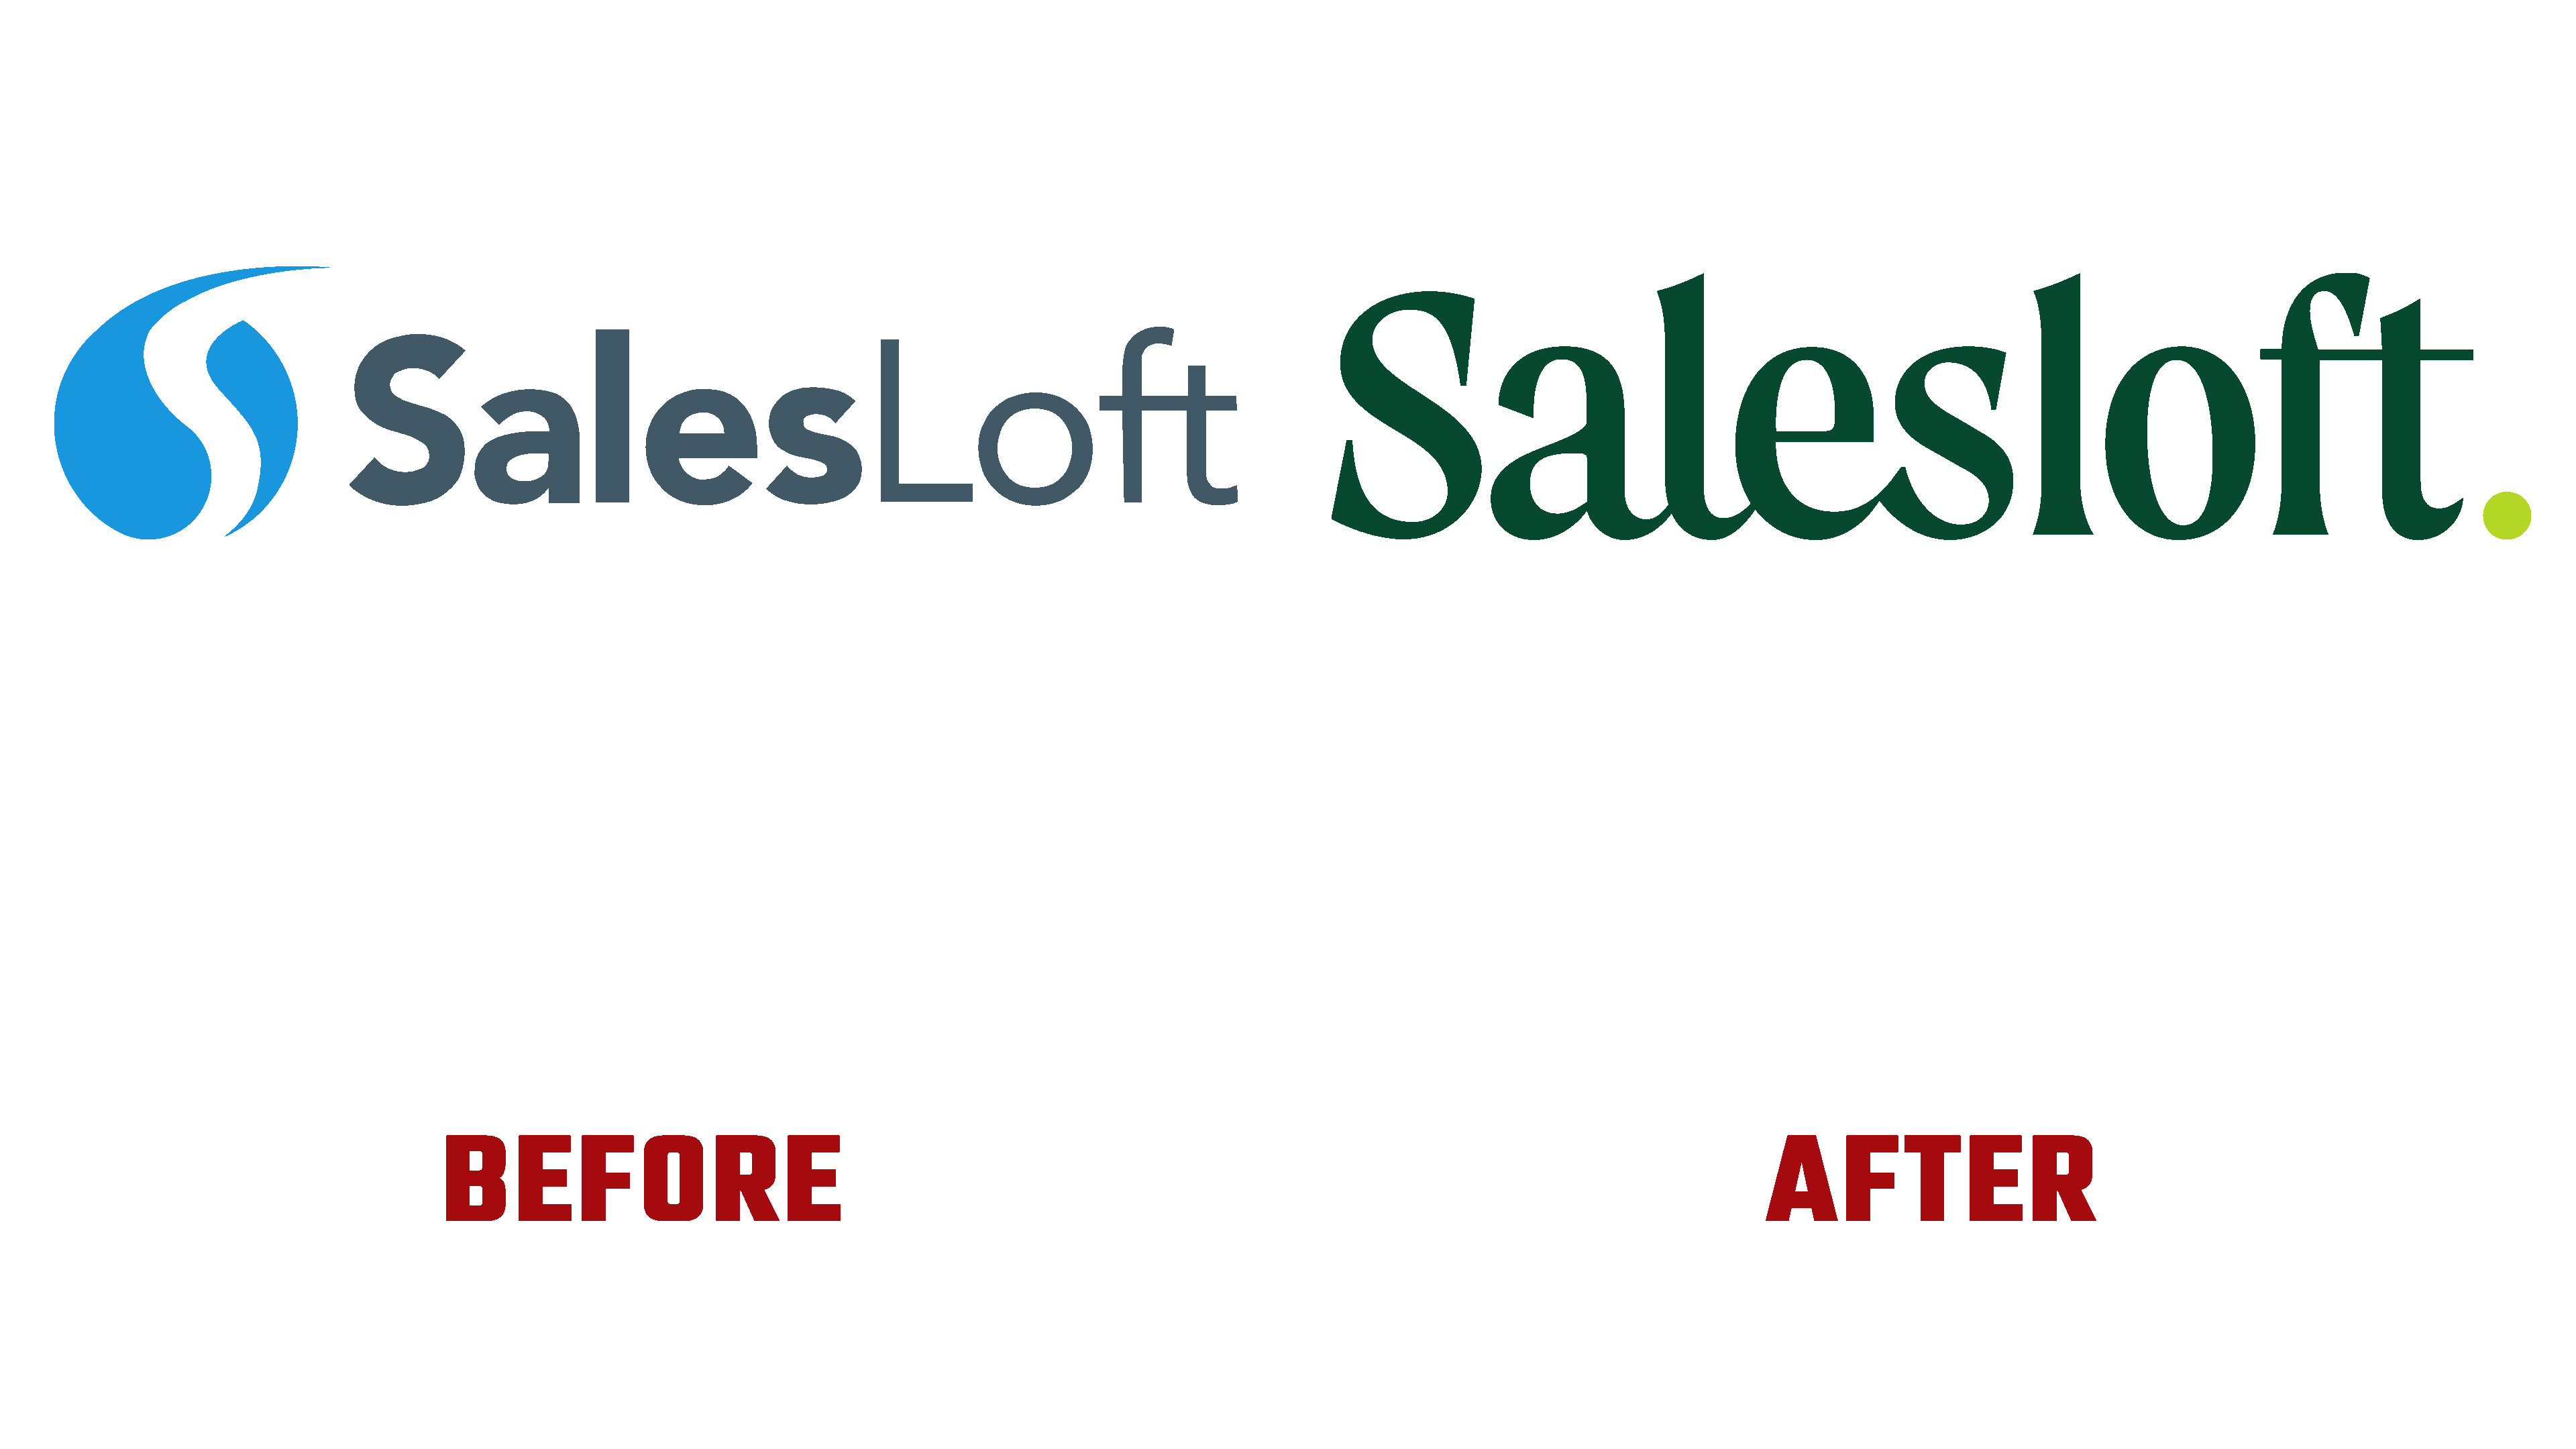 Salesloft Is A Popular Brand With A New Corporate Identity